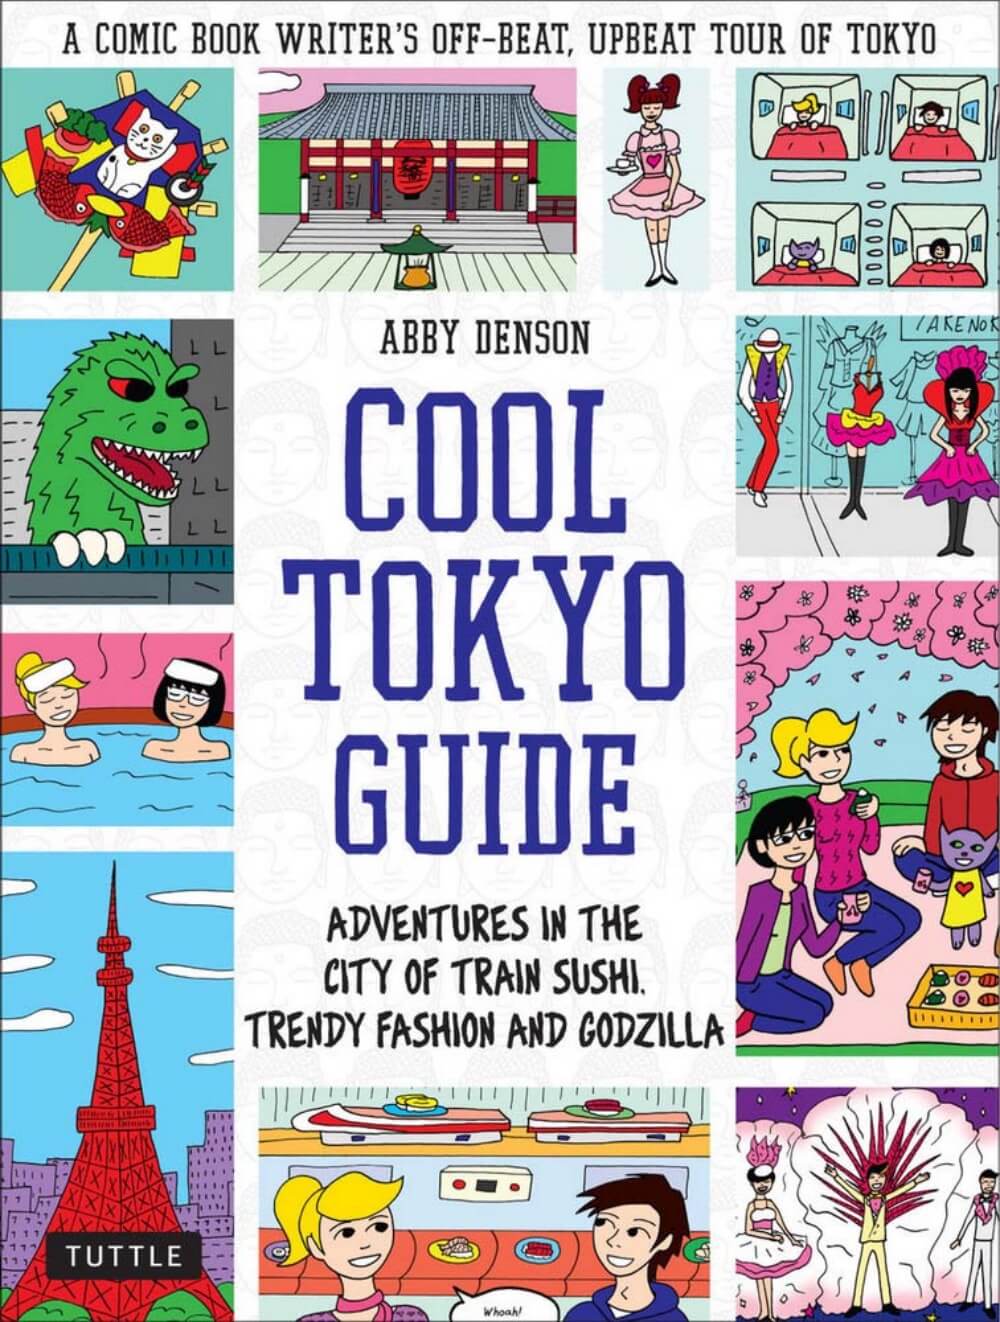 Let's meet Abby, Author of the “Cool Tokyo Guide